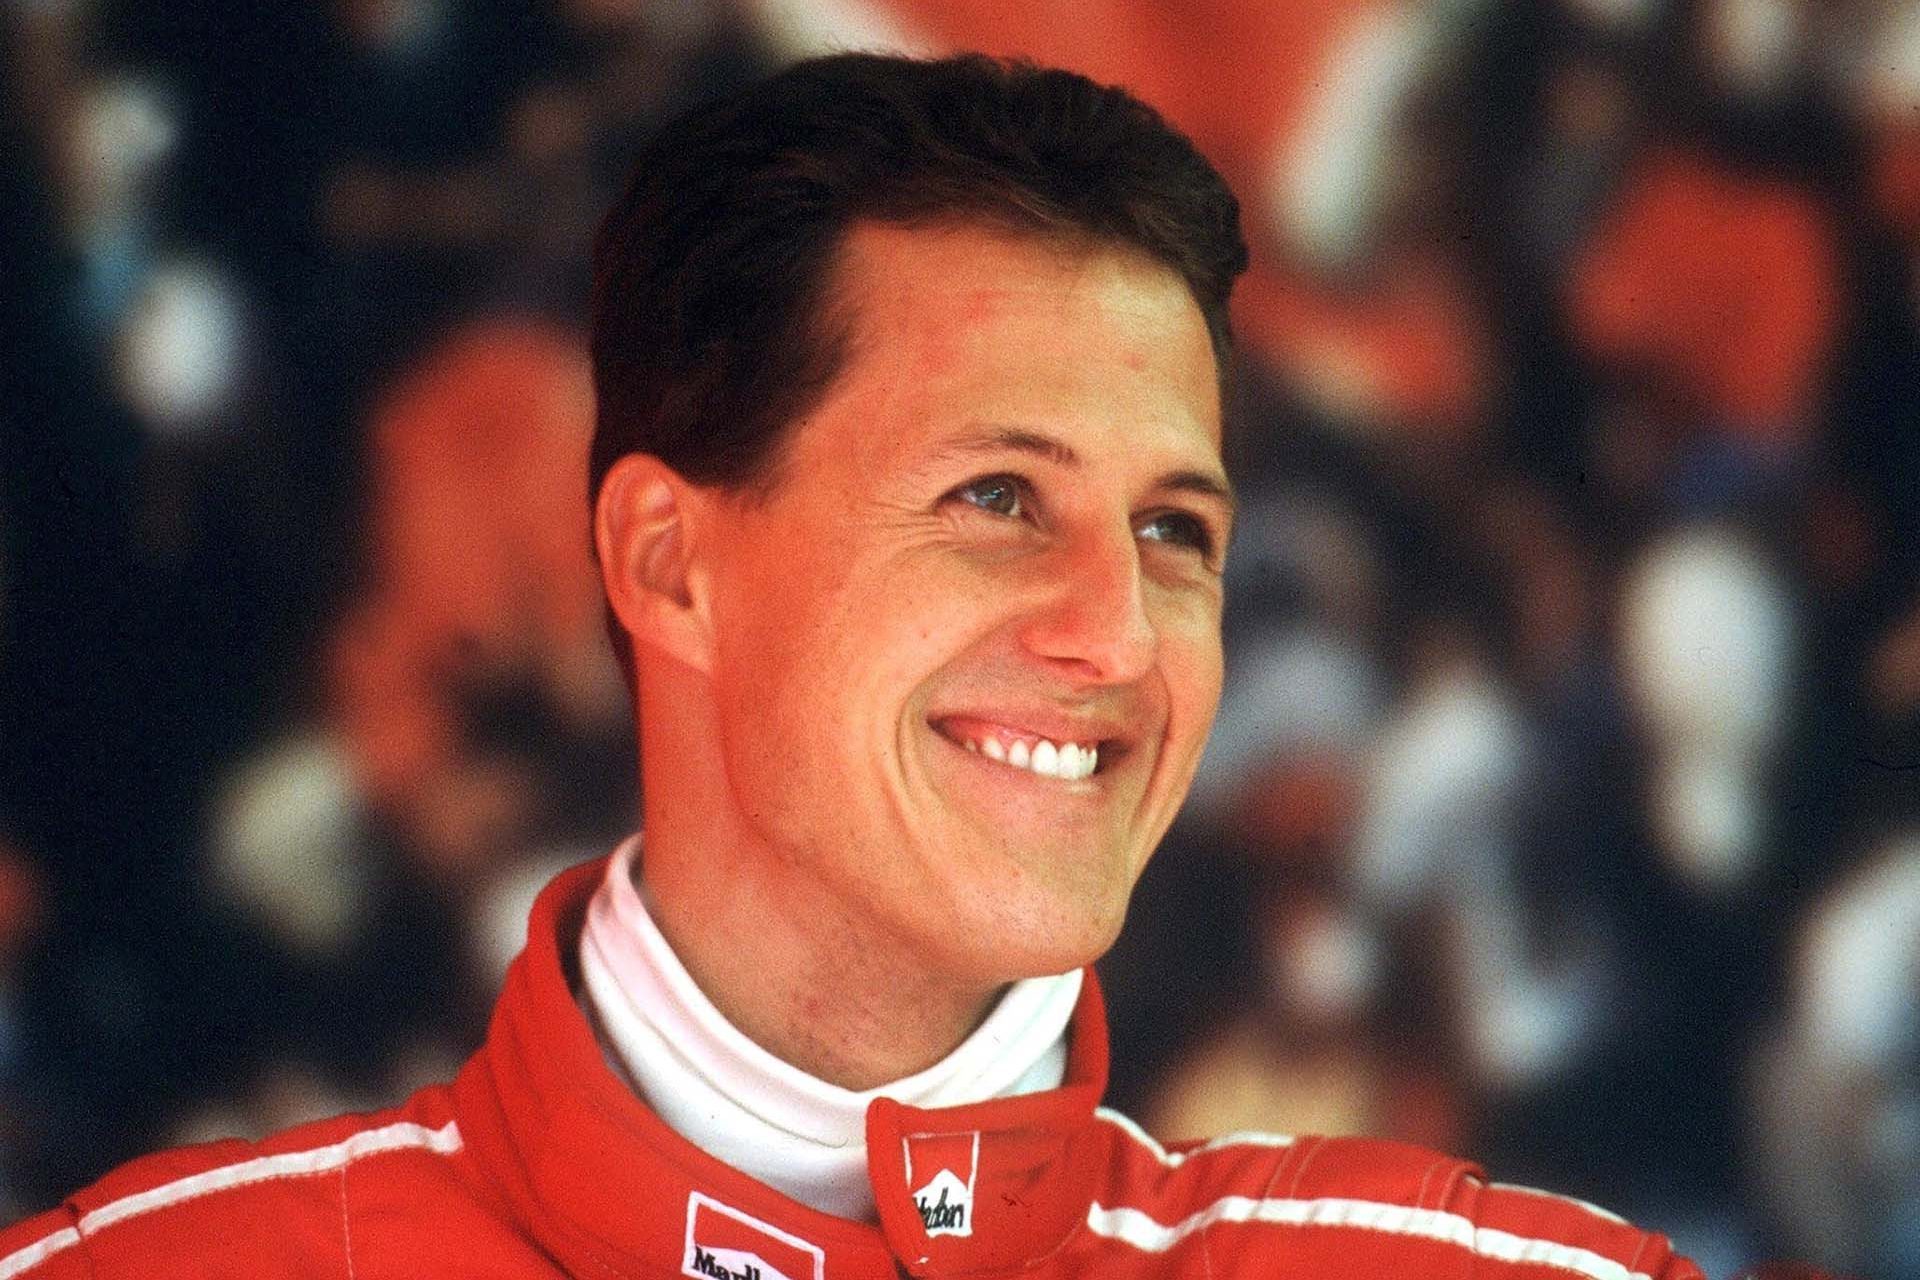 Michael Schumacher's tragic story: this is his current health state